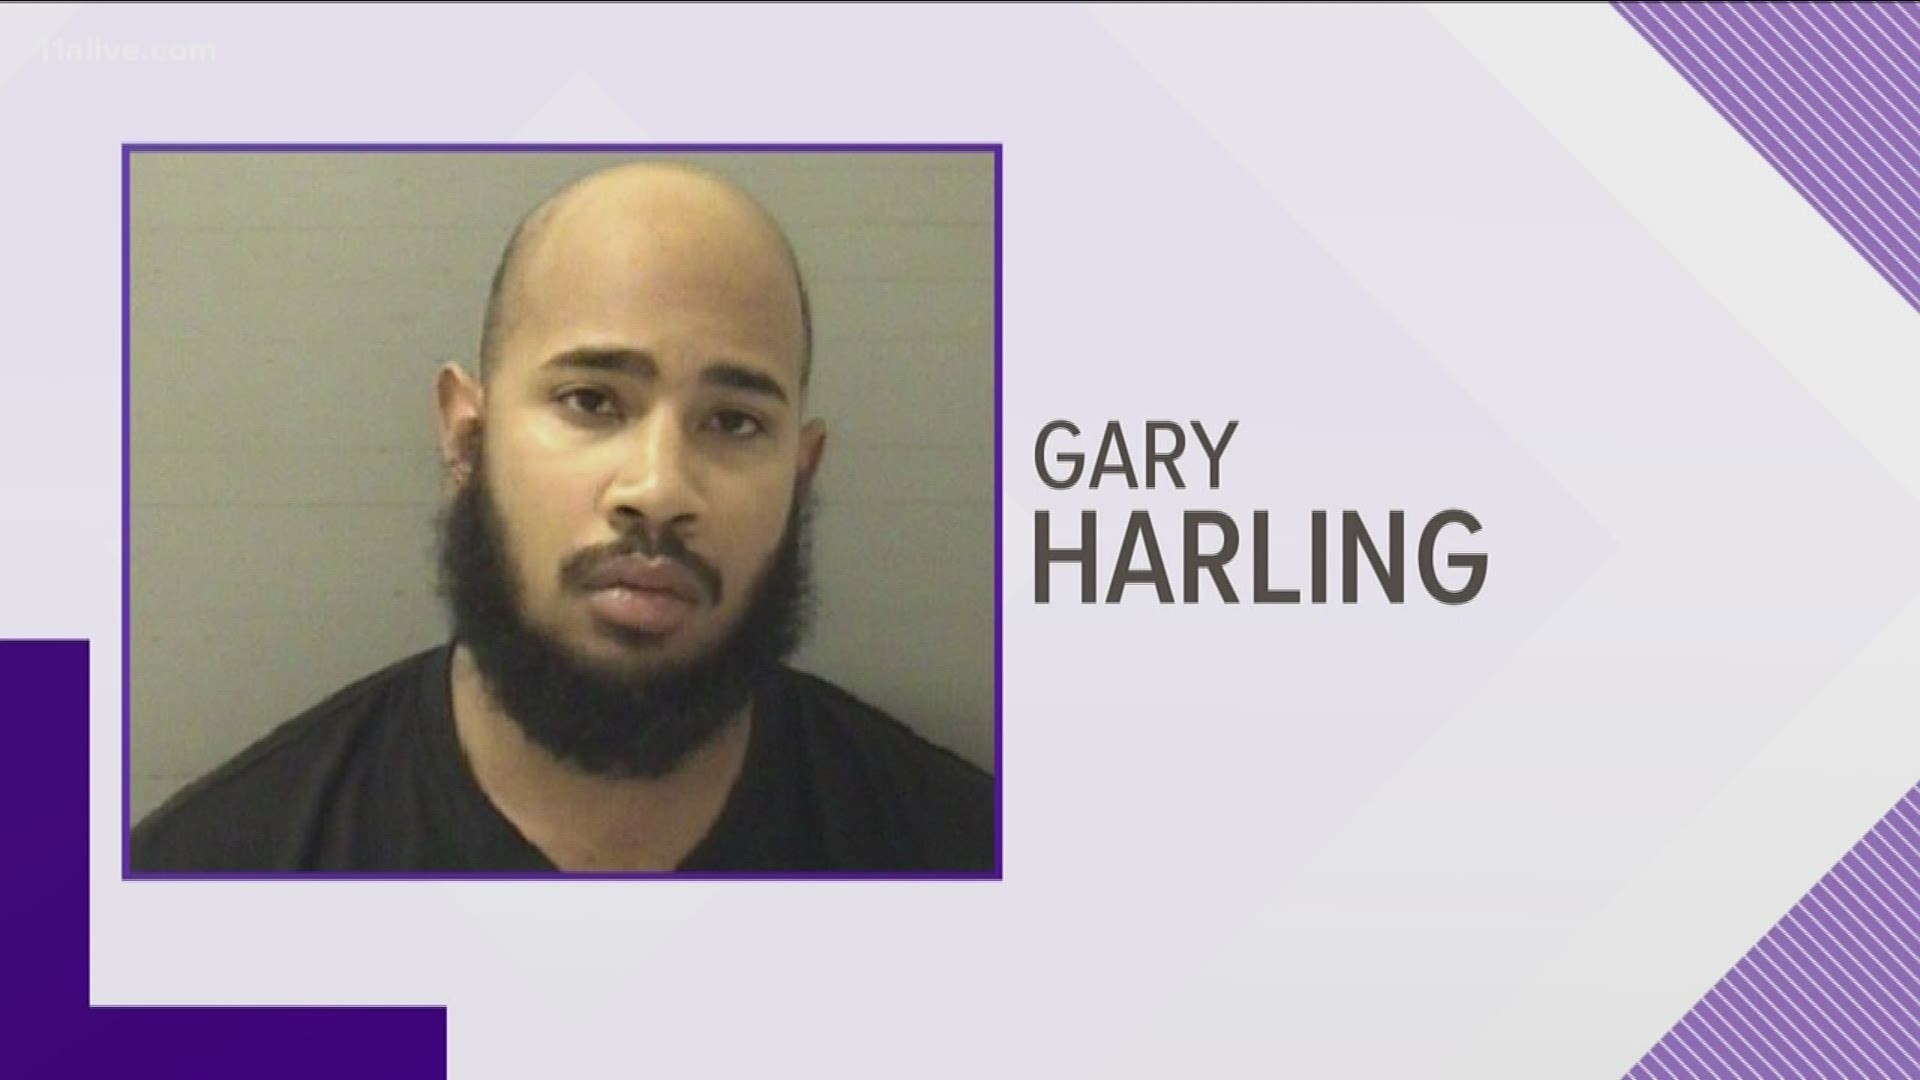 Gary Harling has been charged with two counts of attempted kidnapping and false statements